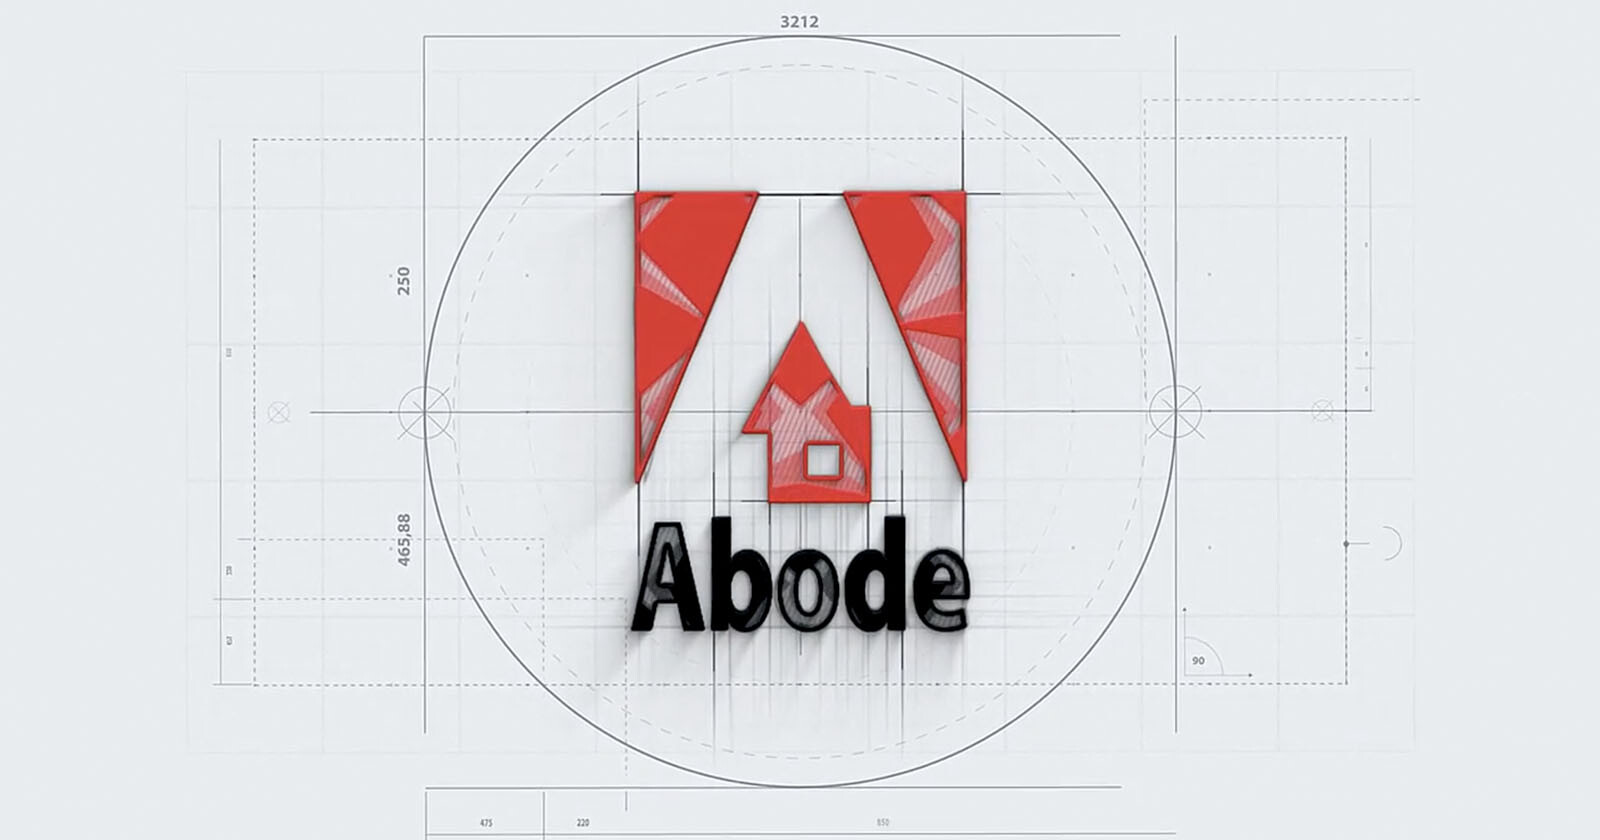  abode suite creative apps takes aim 